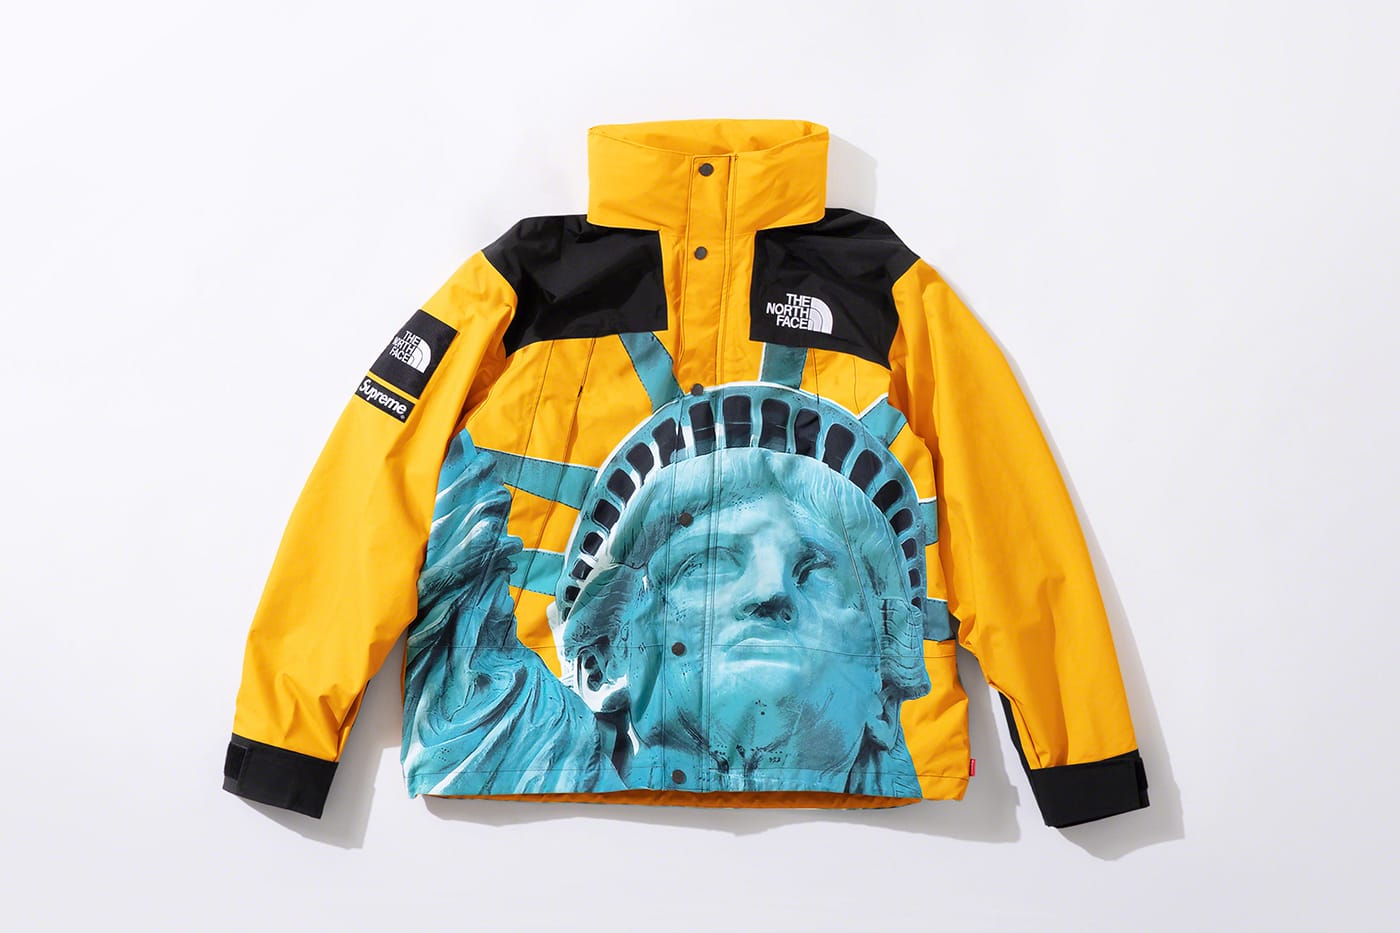 supreme and north face collab 2019